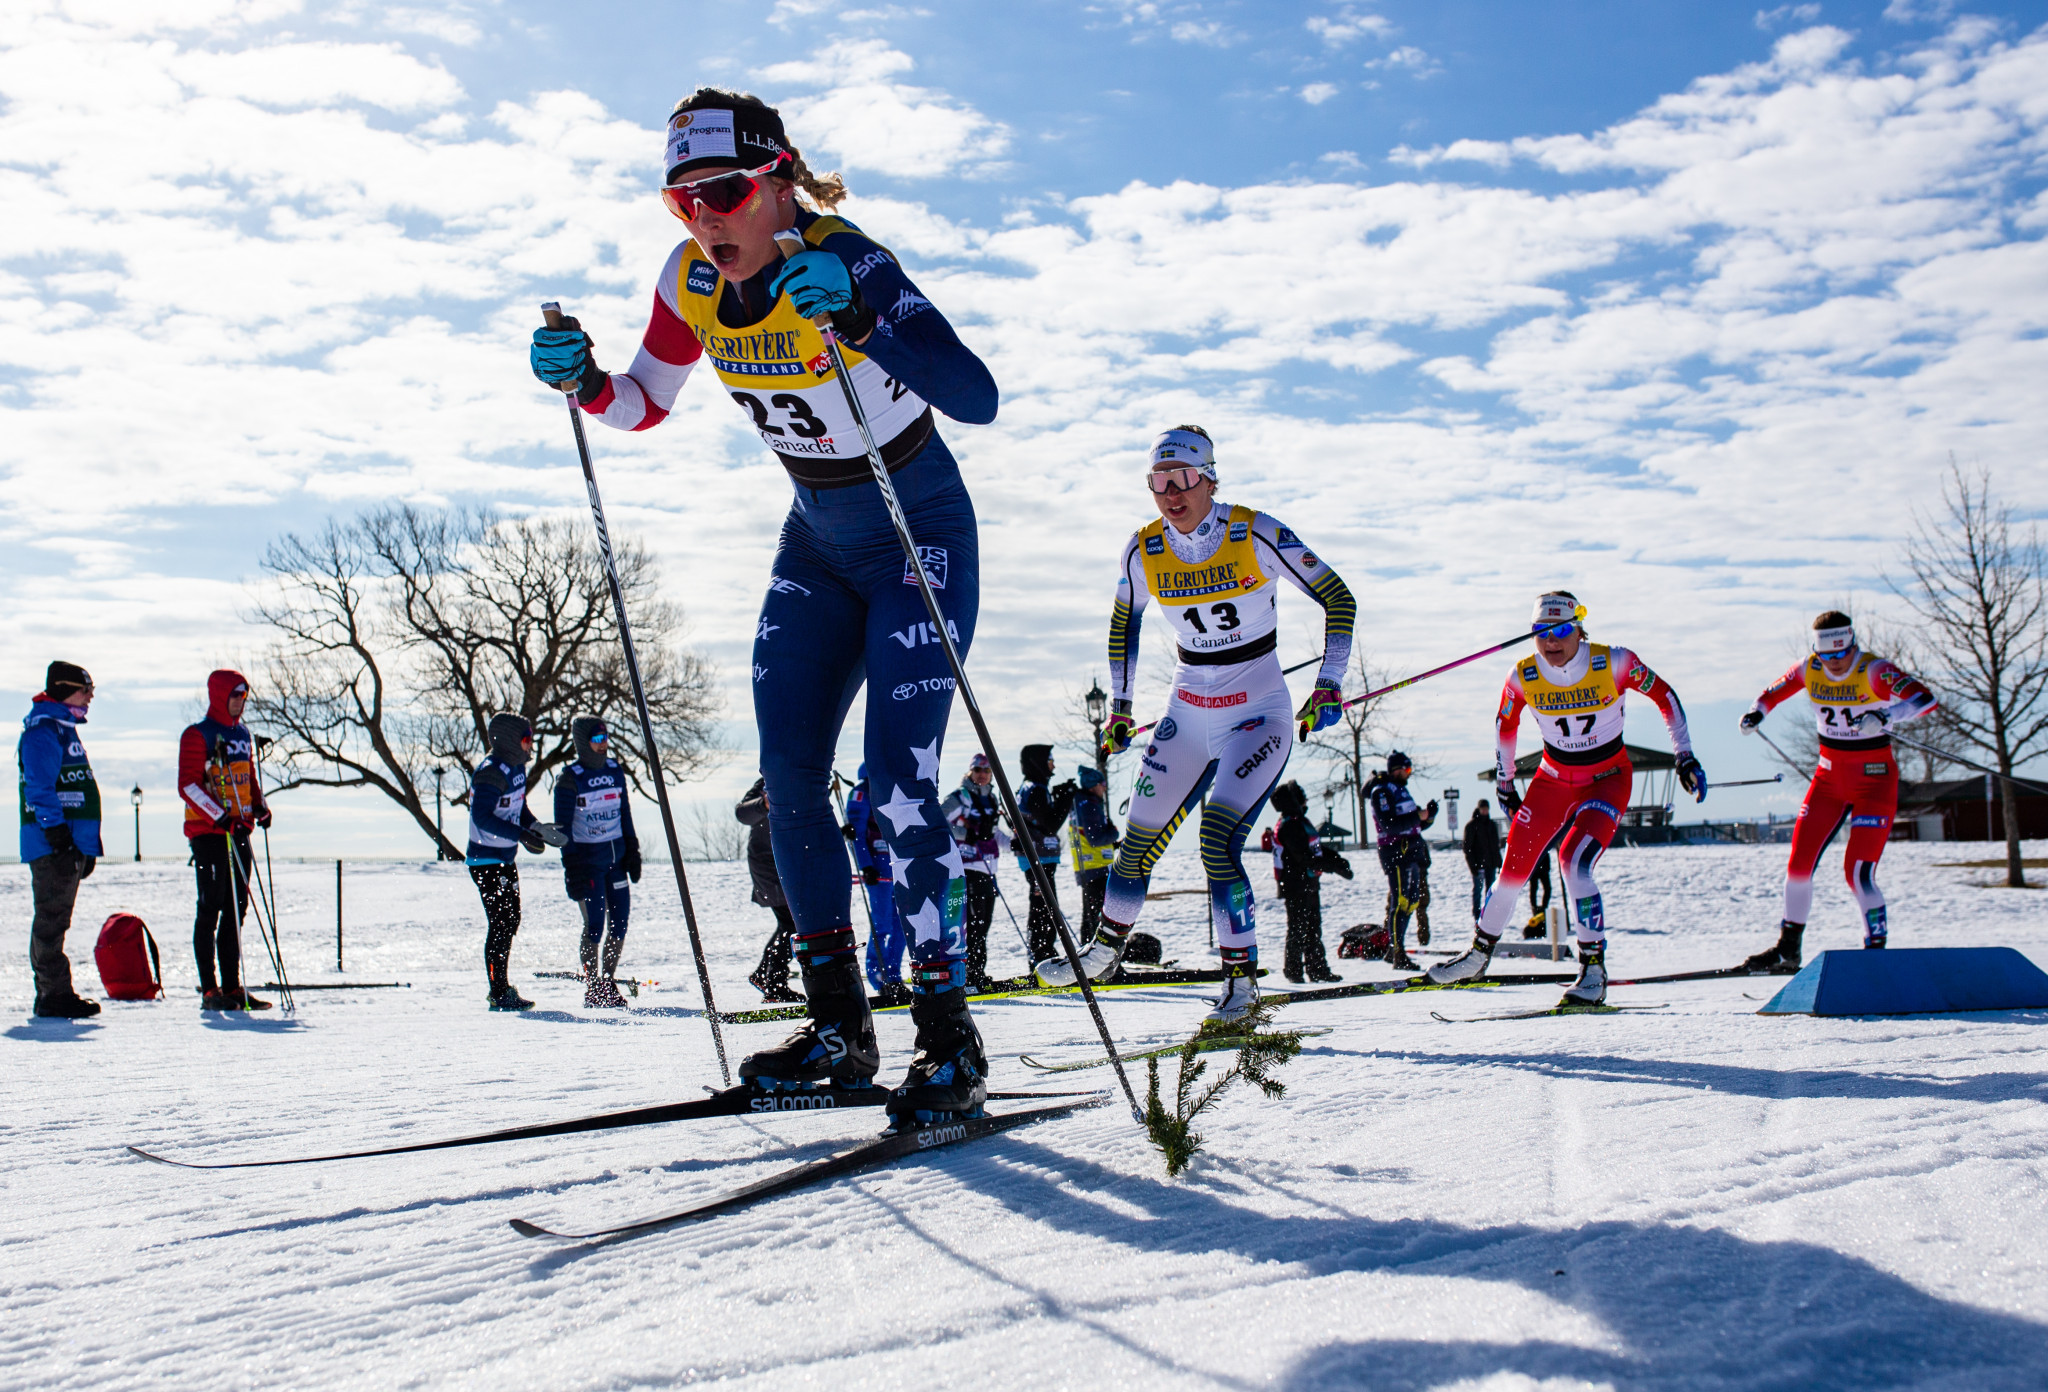 Cross-country officials assess preparations for inaugural Ski Tour